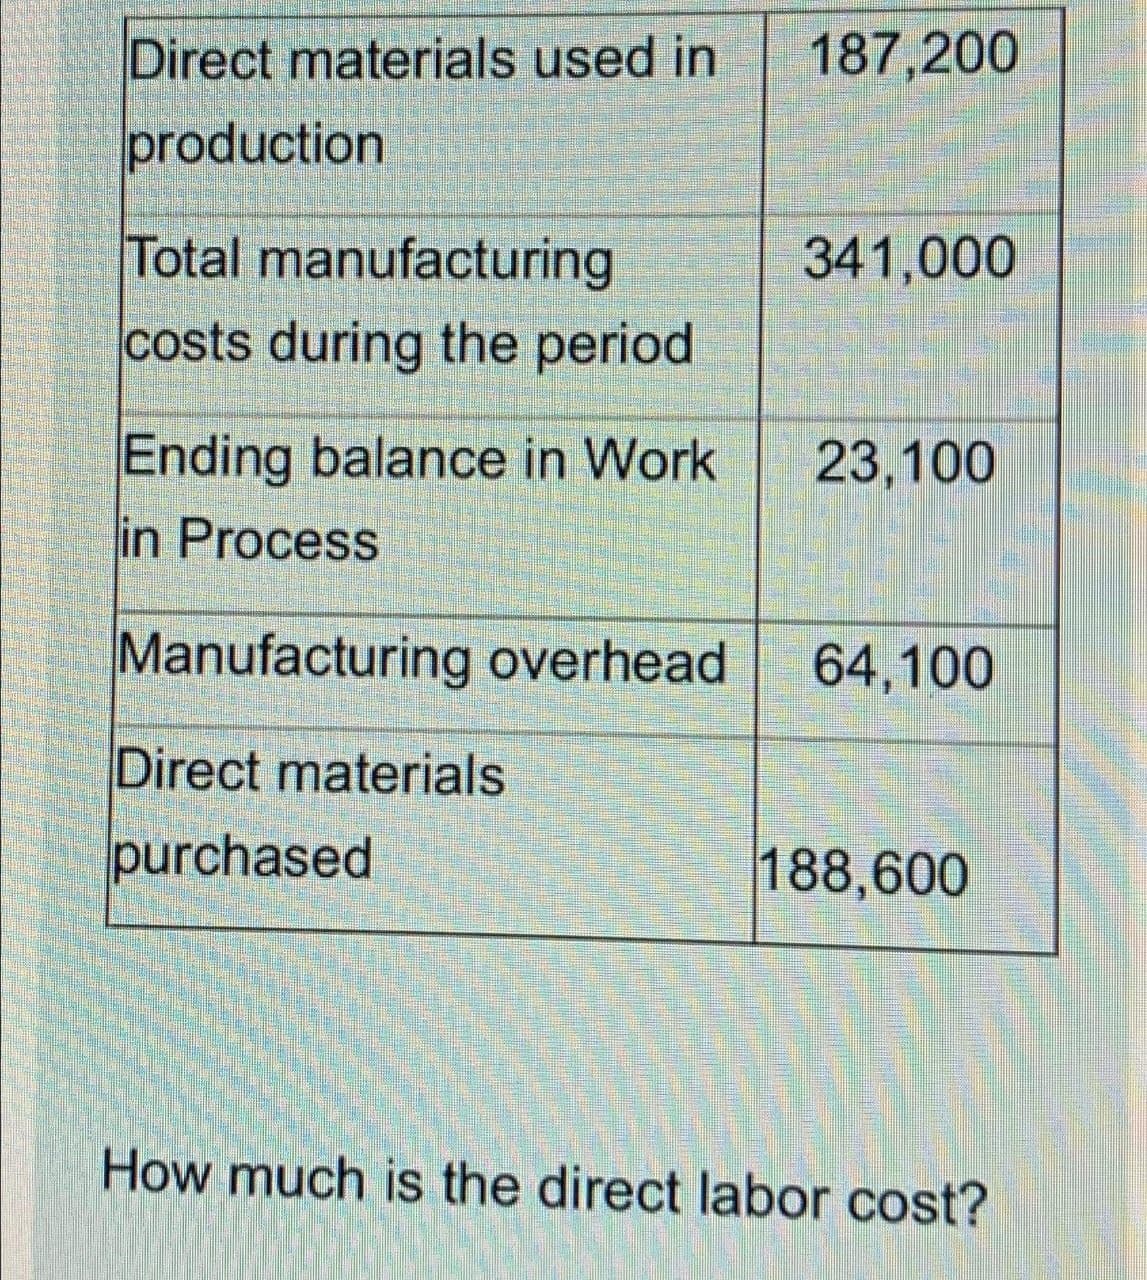 Direct materials used in
production
187,200
Total manufacturing
costs during the period
Ending balance in Work
in Process
Manufacturing overhead 64,100
Direct materials
purchased
341,000
23,100
188,600
How much is the direct labor cost?